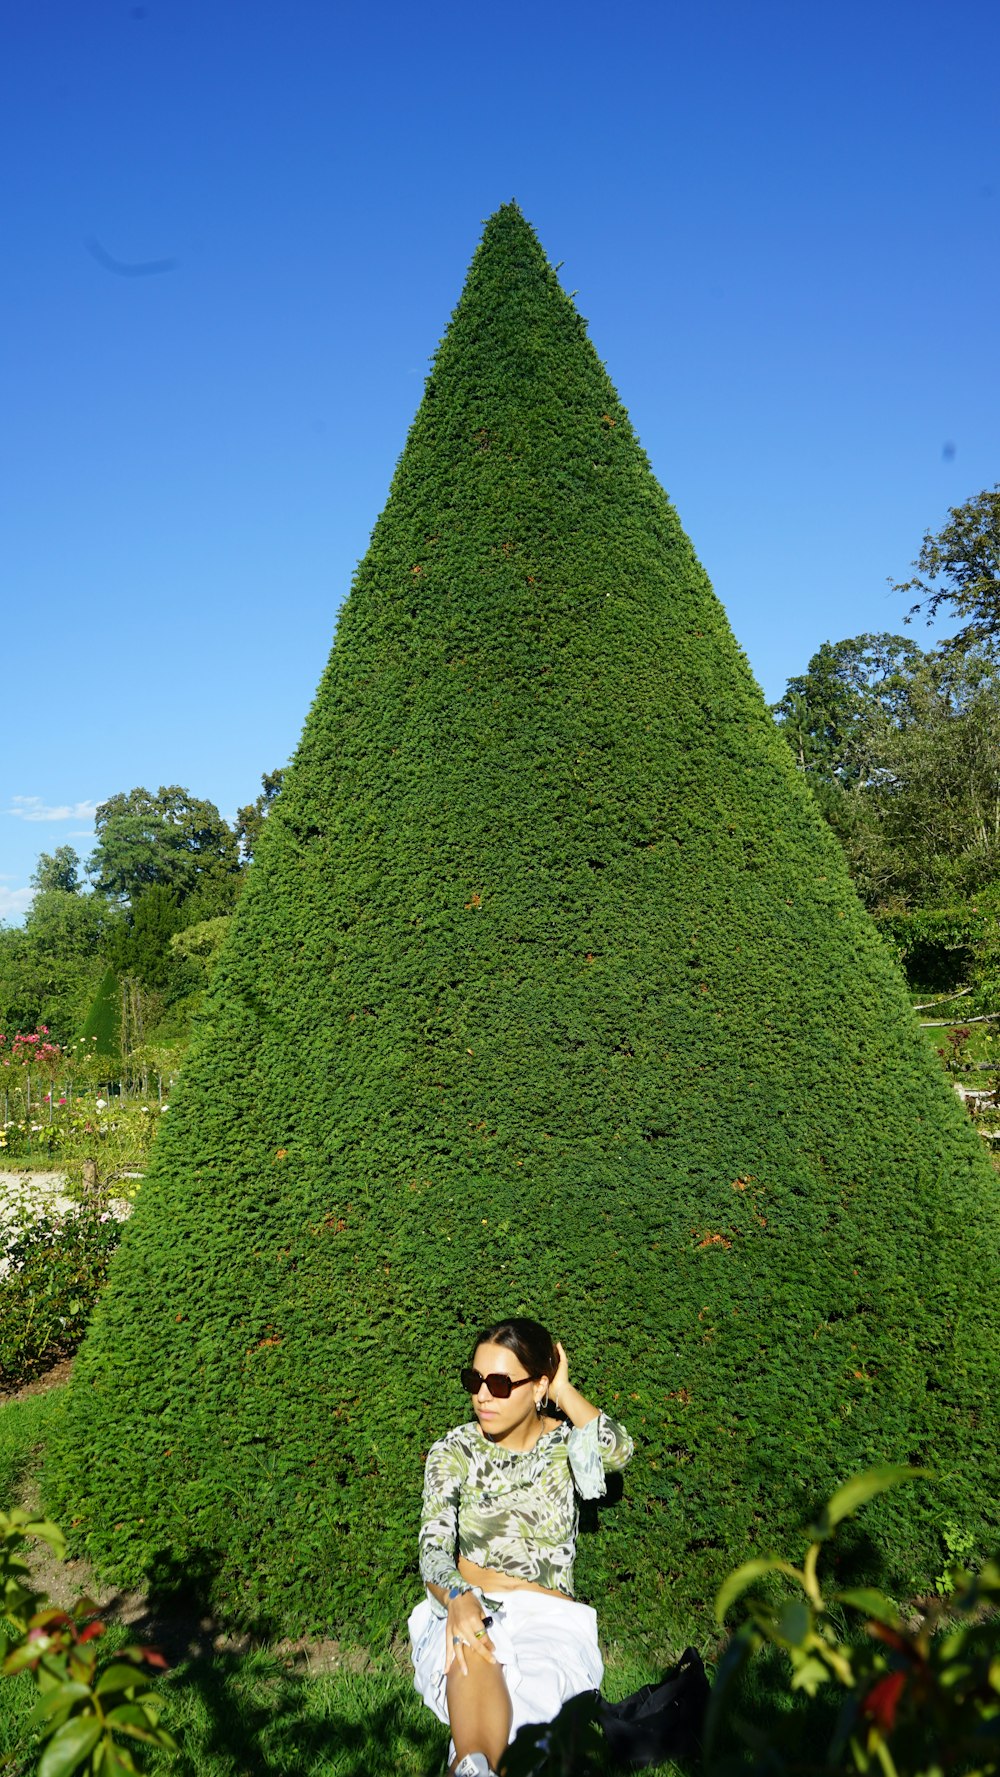 a woman sitting in front of a very tall green cone